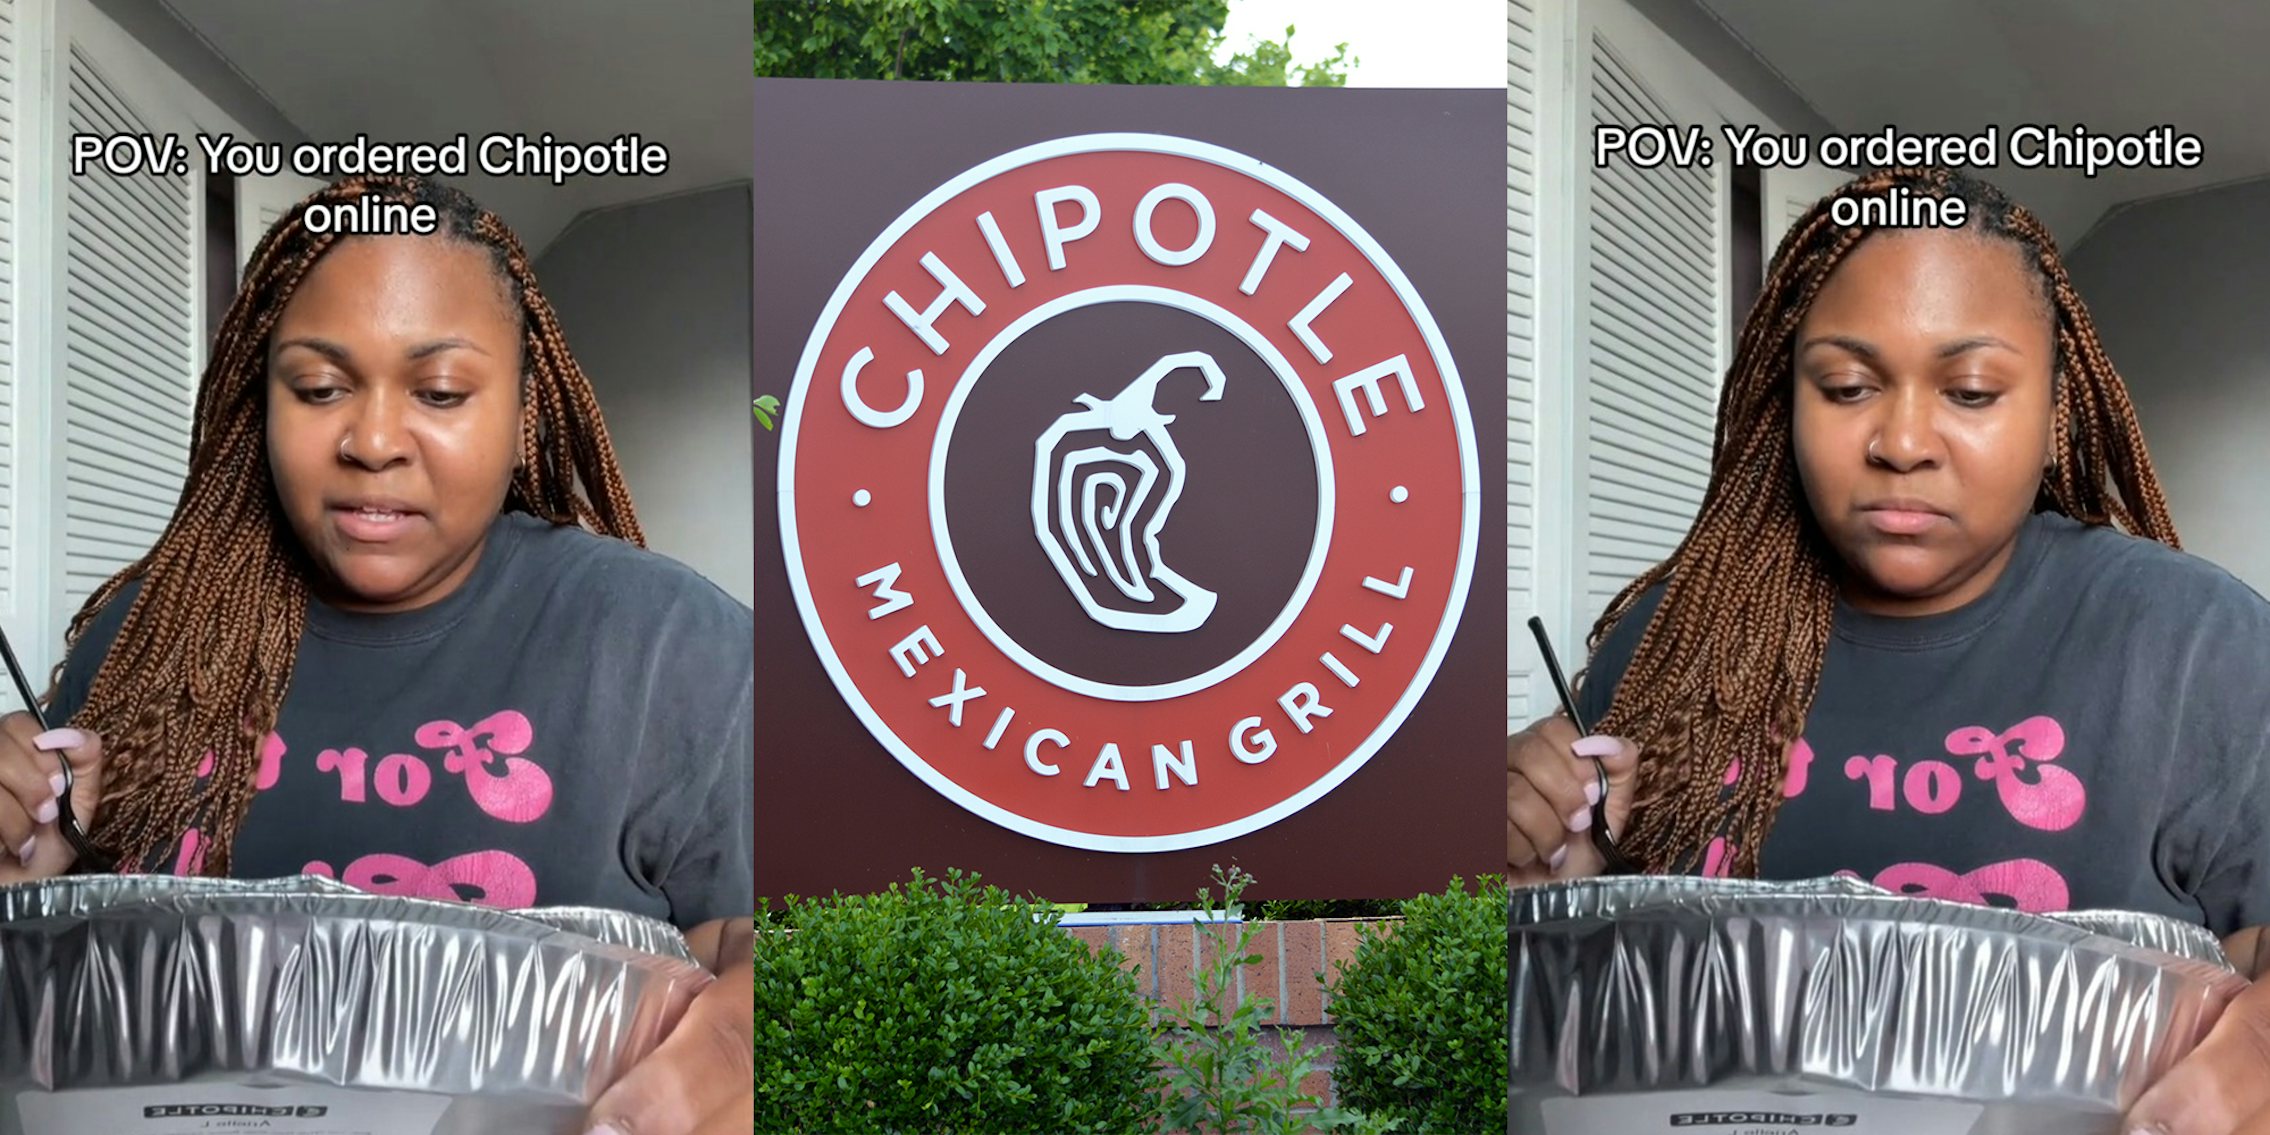 Customer complains about Chipotle for botching online orders